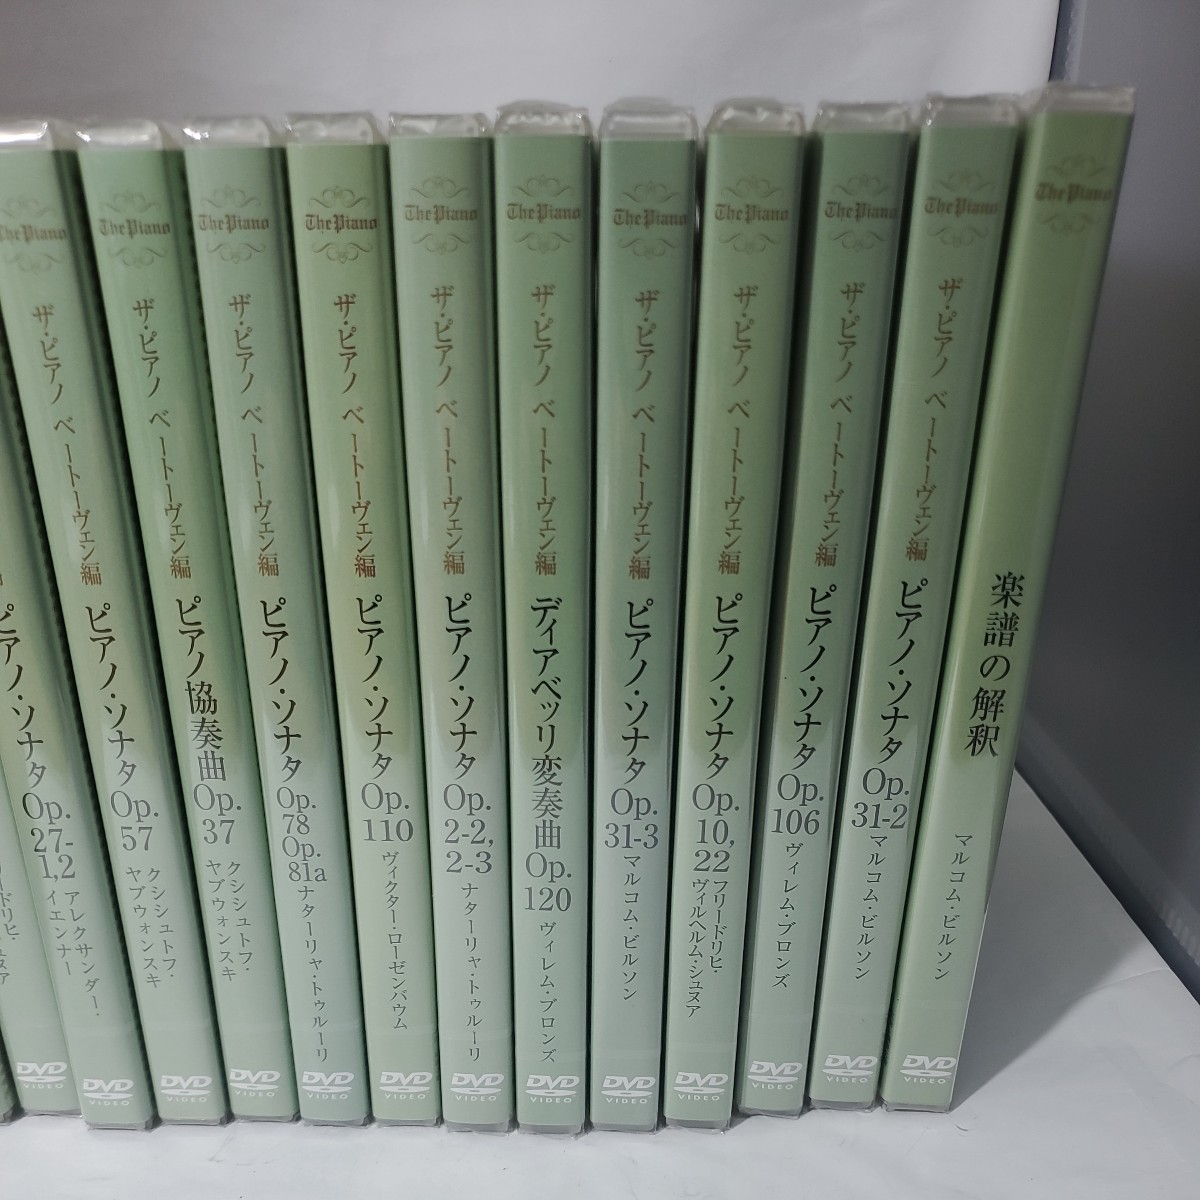  rare [ new goods unopened ]DVD The * piano The Piano..... beige to-ven compilation 15 volume set writing . company not for sale limited goods 